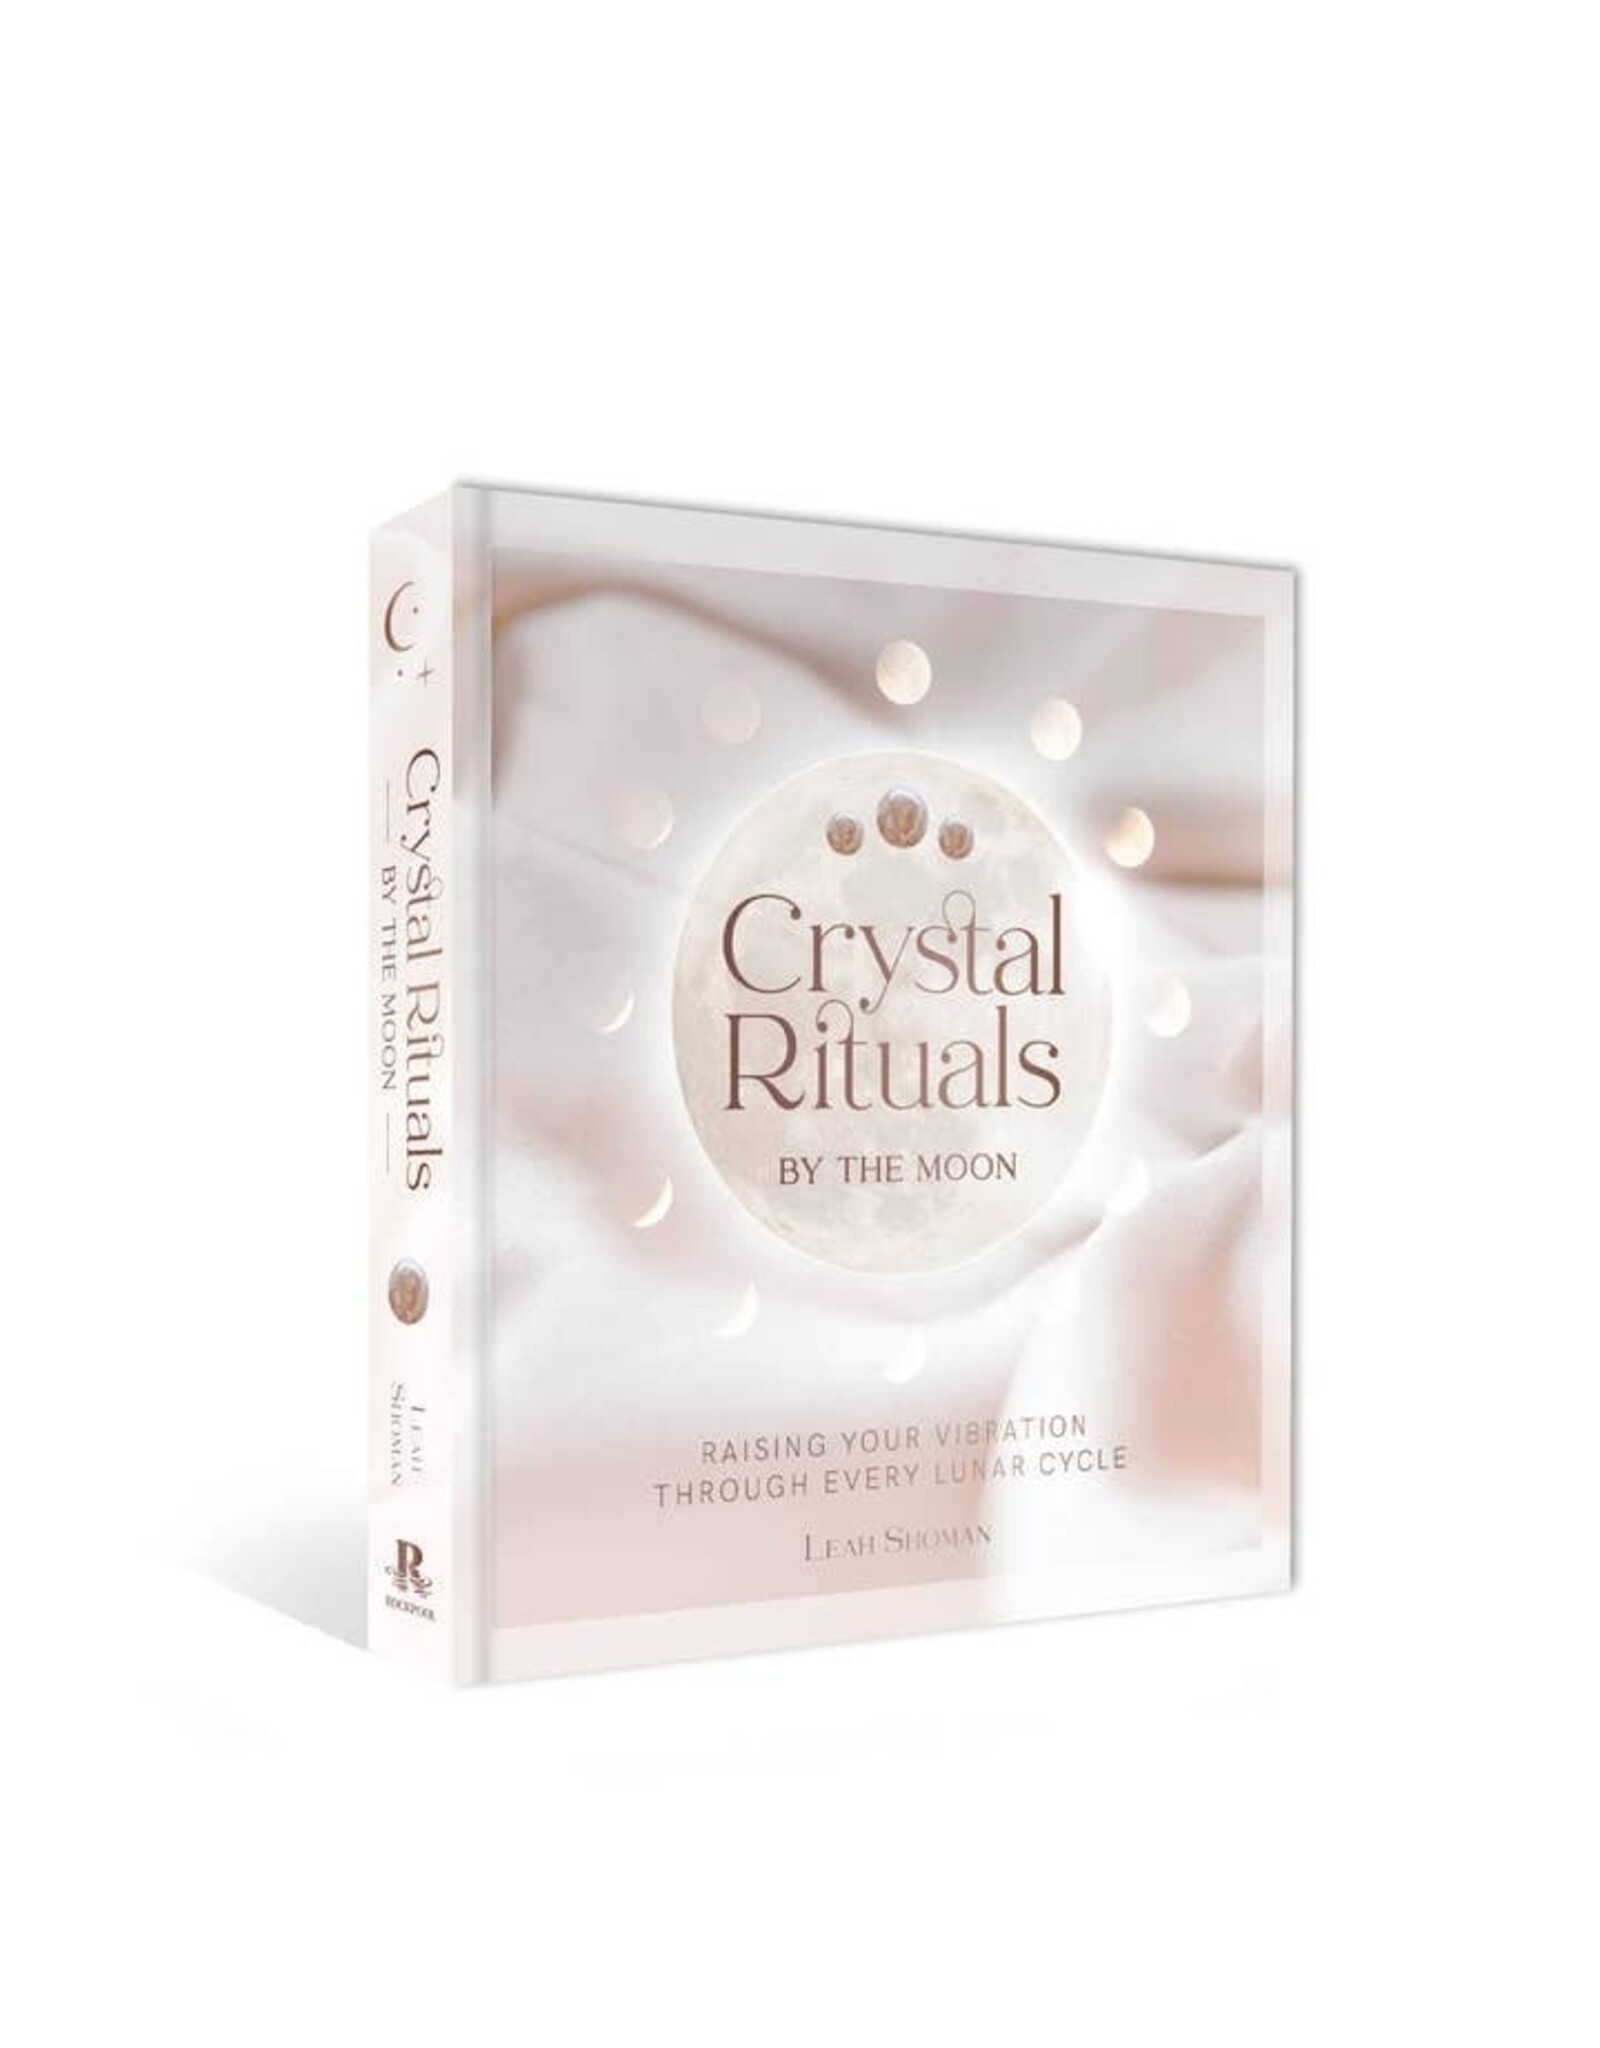 Crystal Rituals by the Moon (Hardcover)